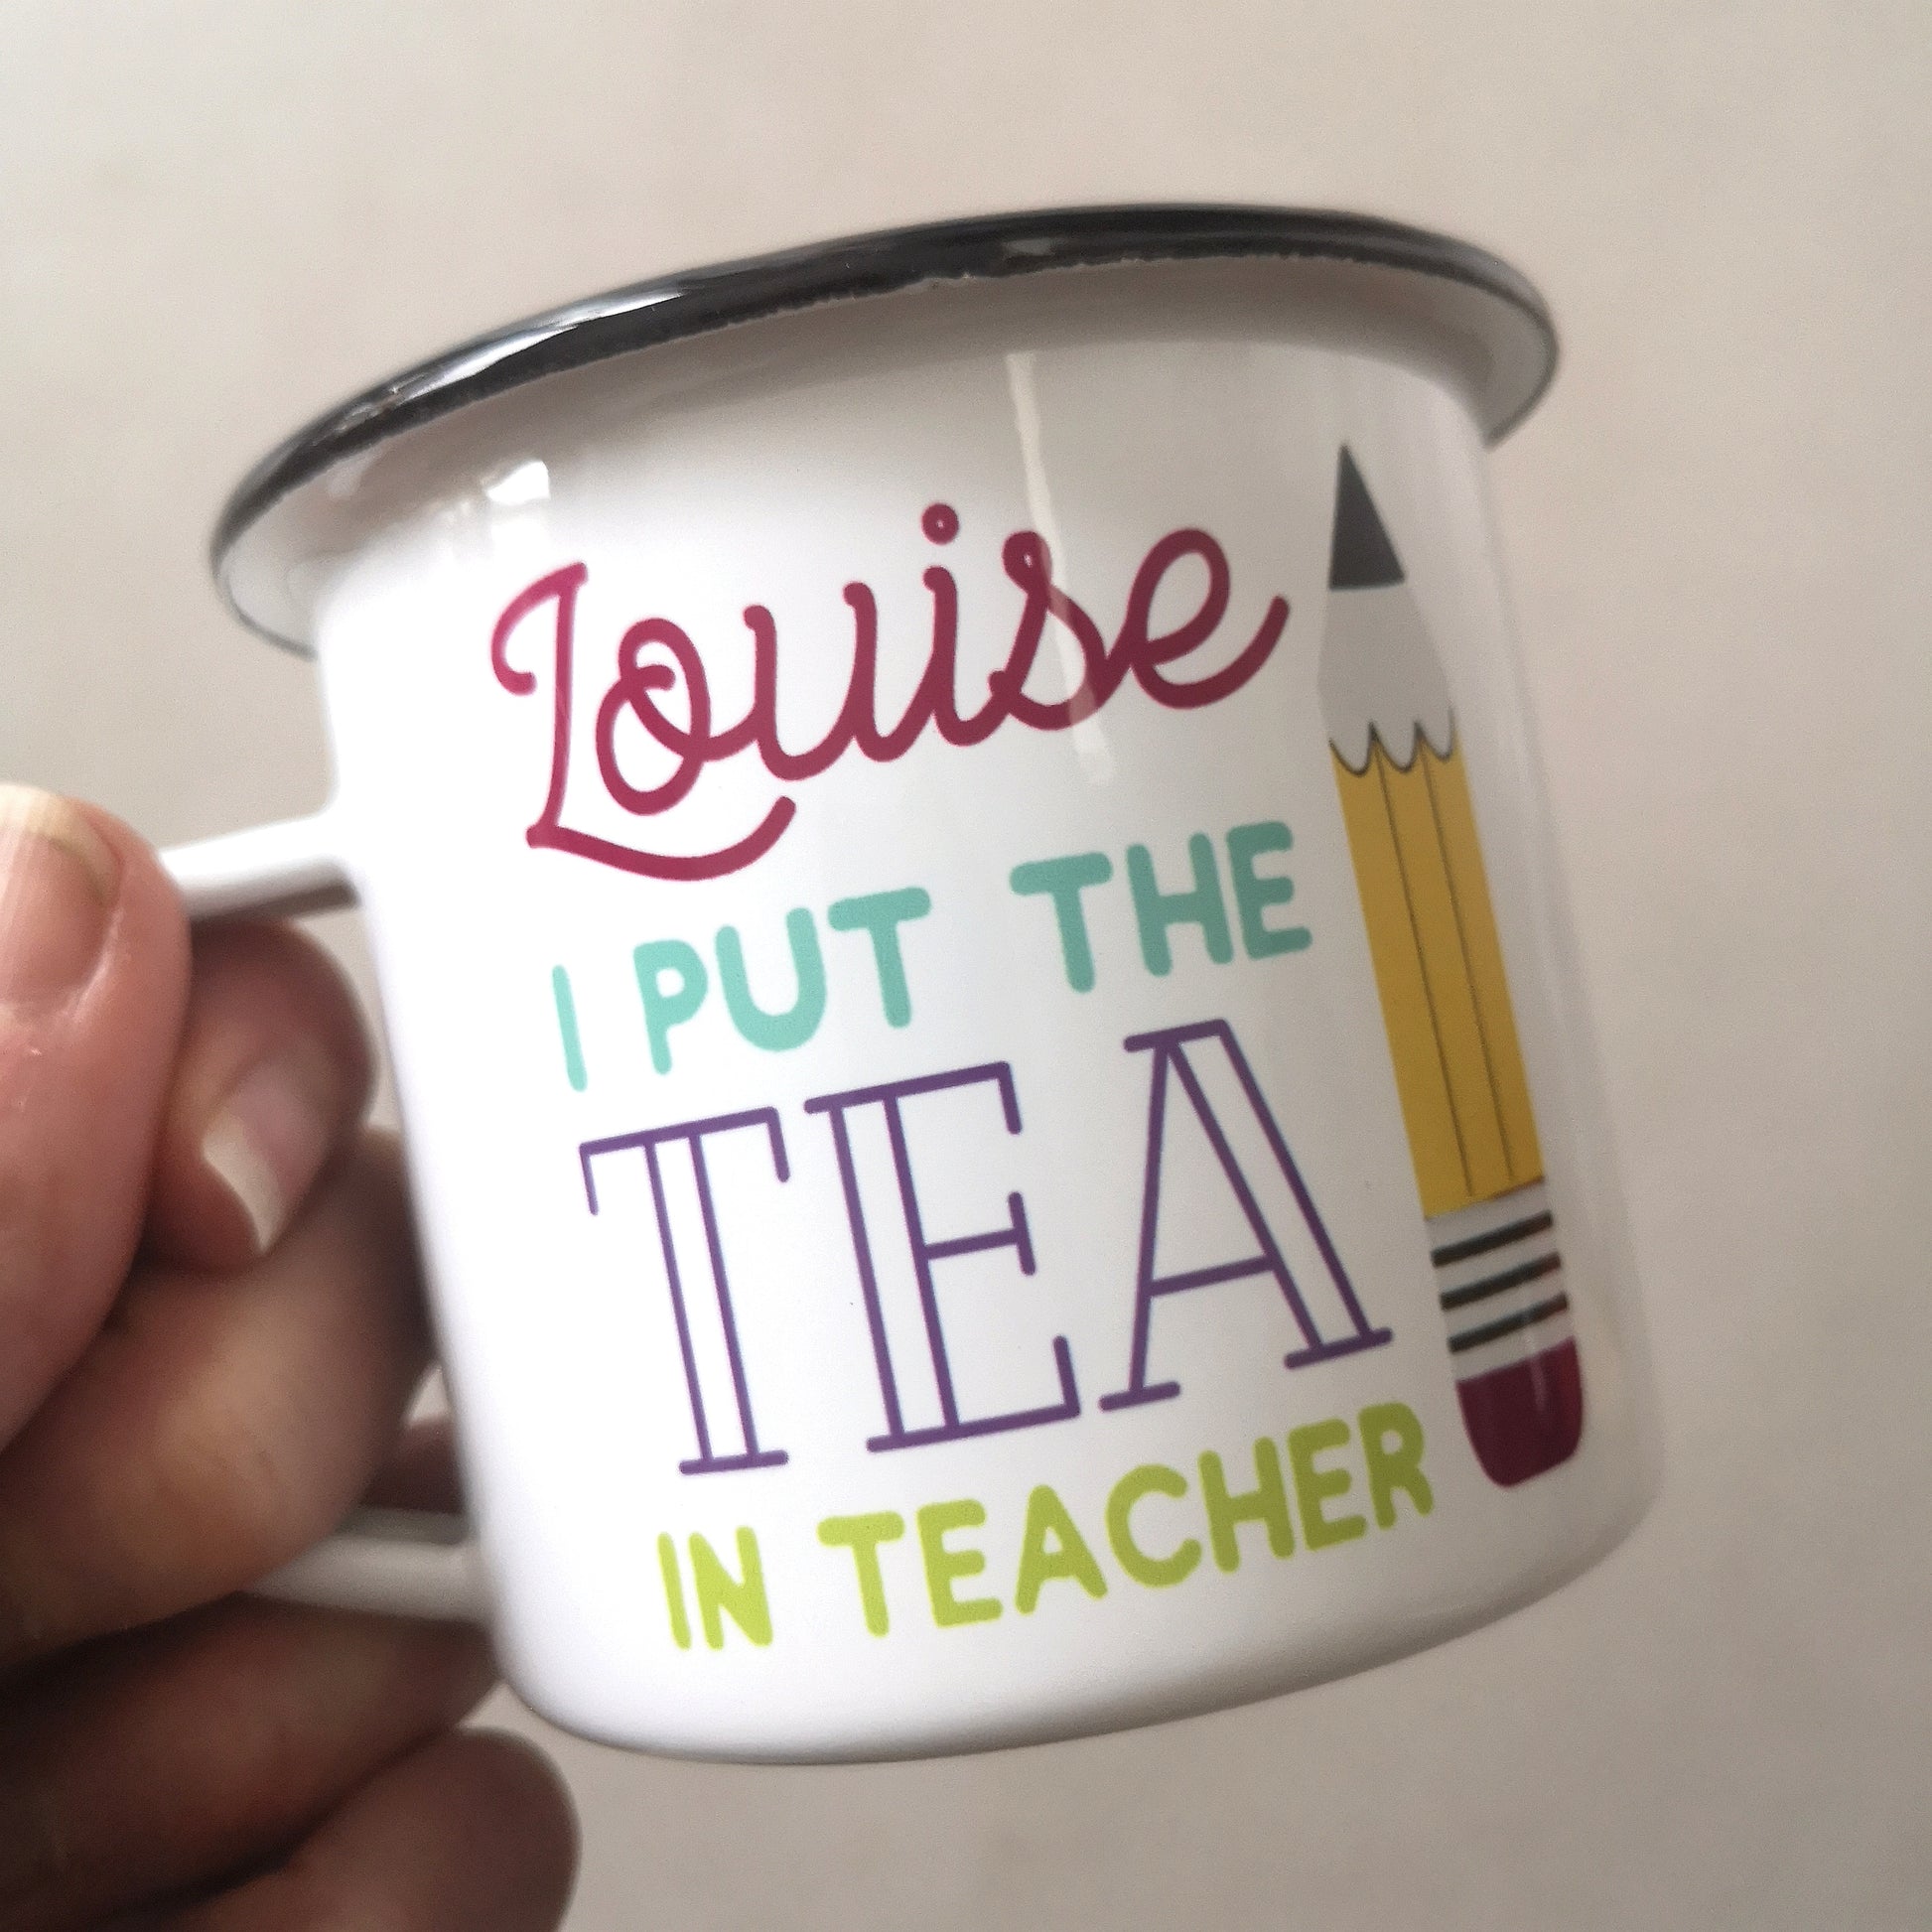 A close up of a White enamel mug with a black rim with the following on the front - <NAME> I out the tea in teacher and a big pencil to the right of the text